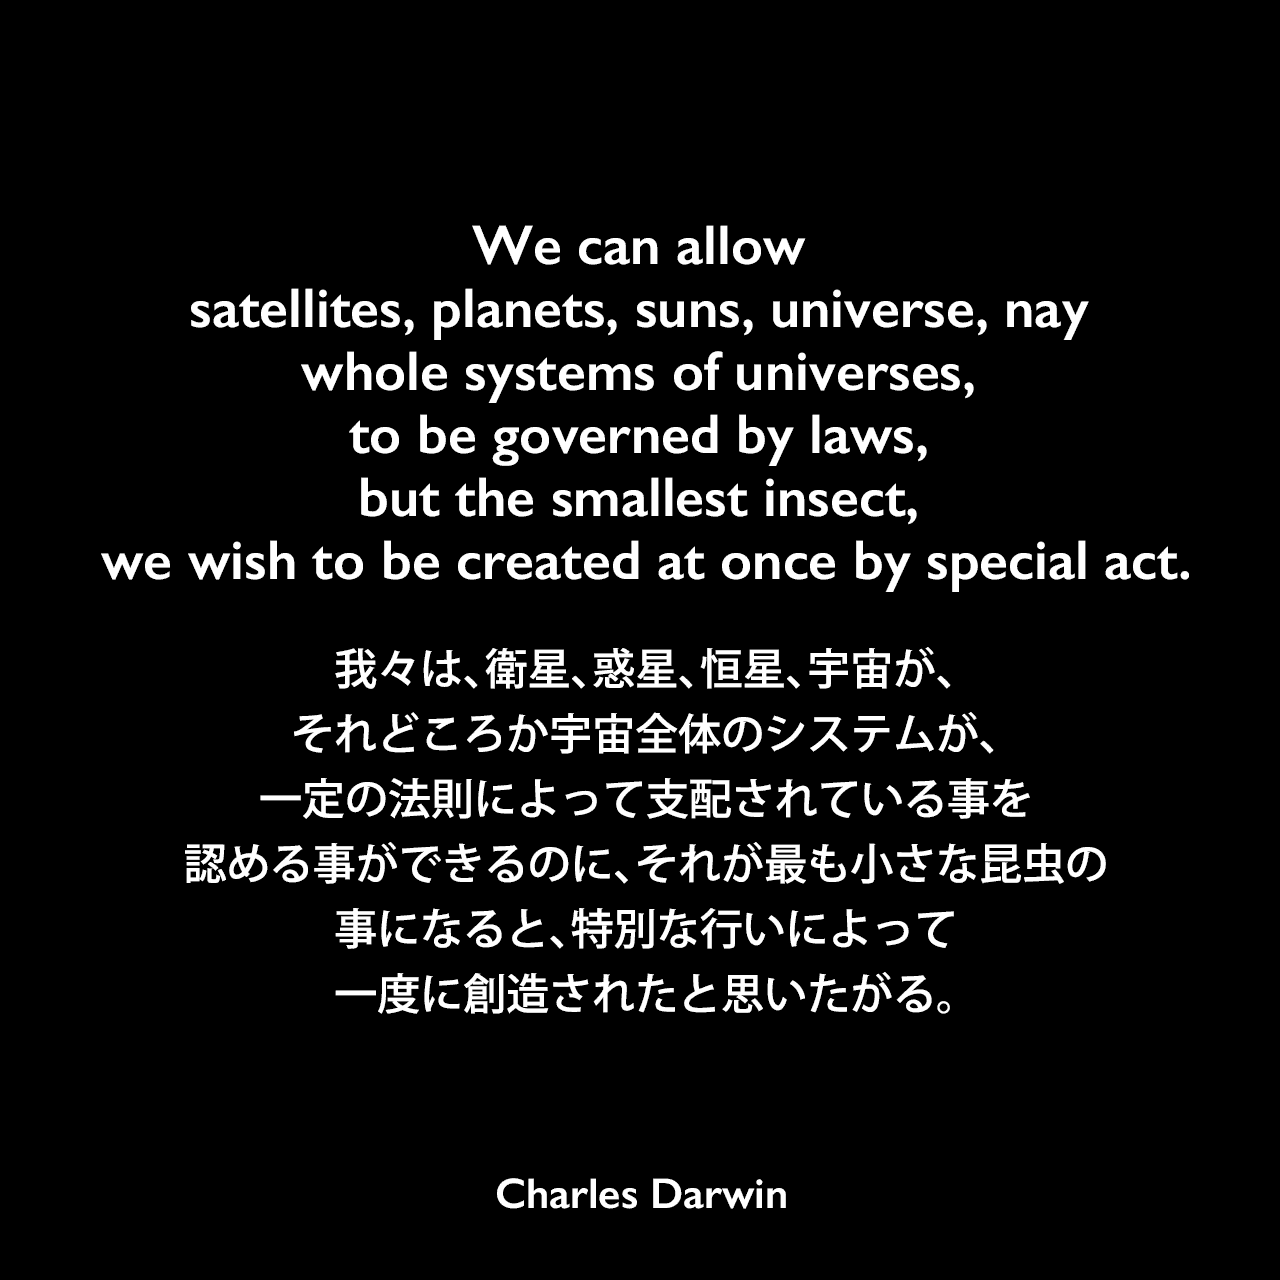 We can allow satellites, planets, suns, universe, nay whole systems of universes, to be governed by laws, but the smallest insect, we wish to be created at once by special act.我々は、衛星、惑星、恒星、宇宙が、それどころか宇宙全体のシステムが、一定の法則によって支配されている事を認める事ができるのに、それが最も小さな昆虫の事になると、特別な行いによって一度に創造されたと思いたがる。- ダーウィンのノートよりCharles Darwin